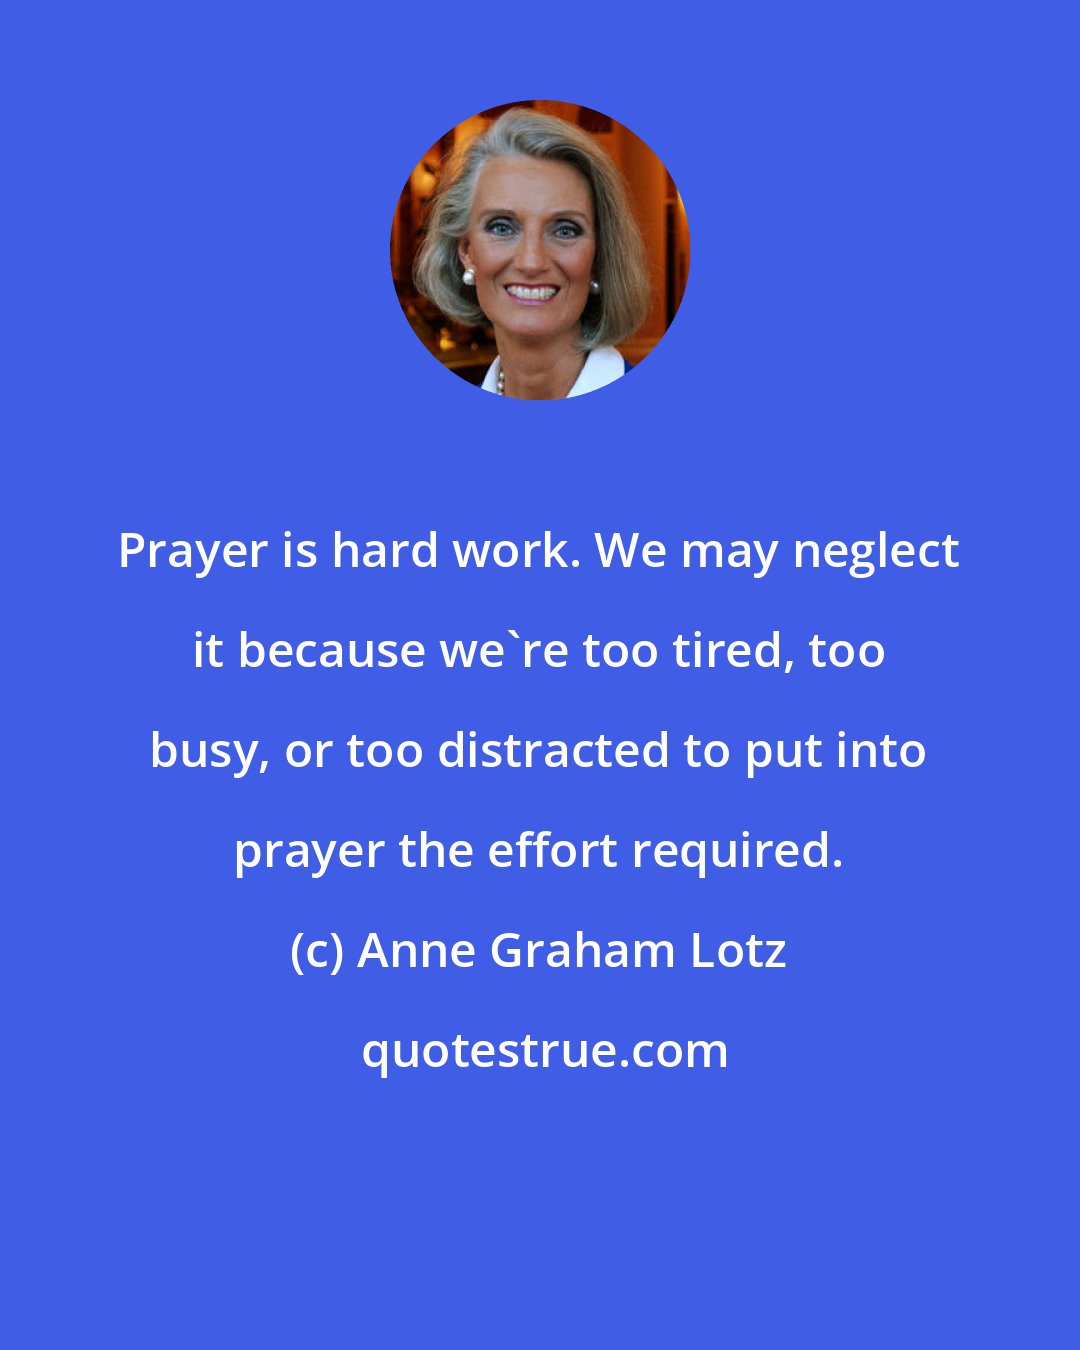 Anne Graham Lotz: Prayer is hard work. We may neglect it because we're too tired, too busy, or too distracted to put into prayer the effort required.